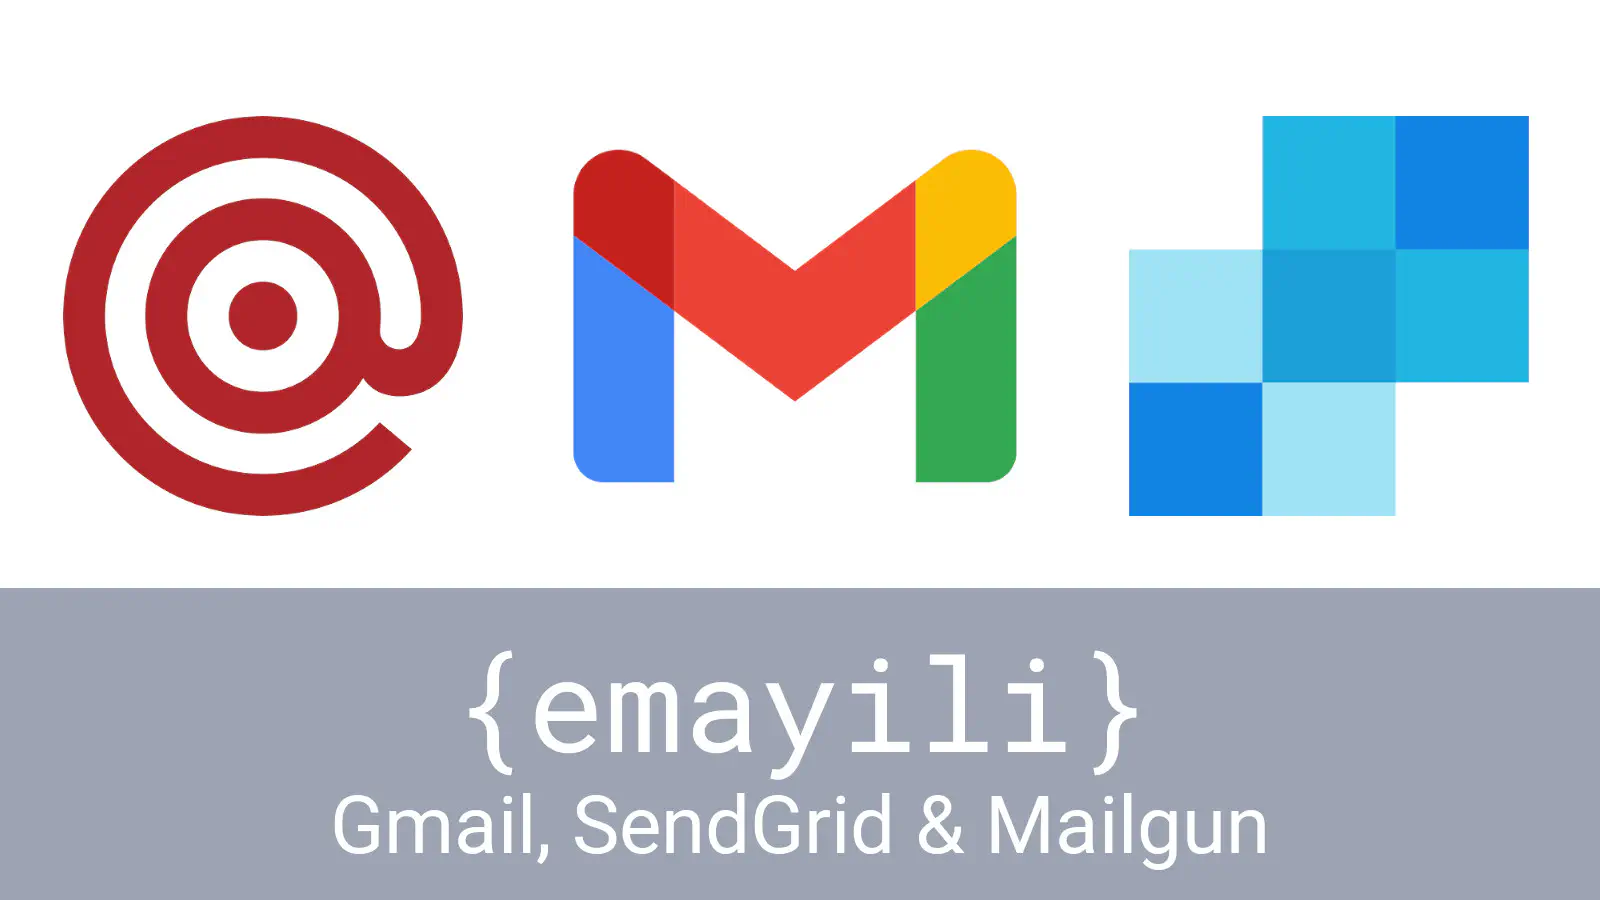 How to Easily Create and Share Gmail Templates | Gmelius